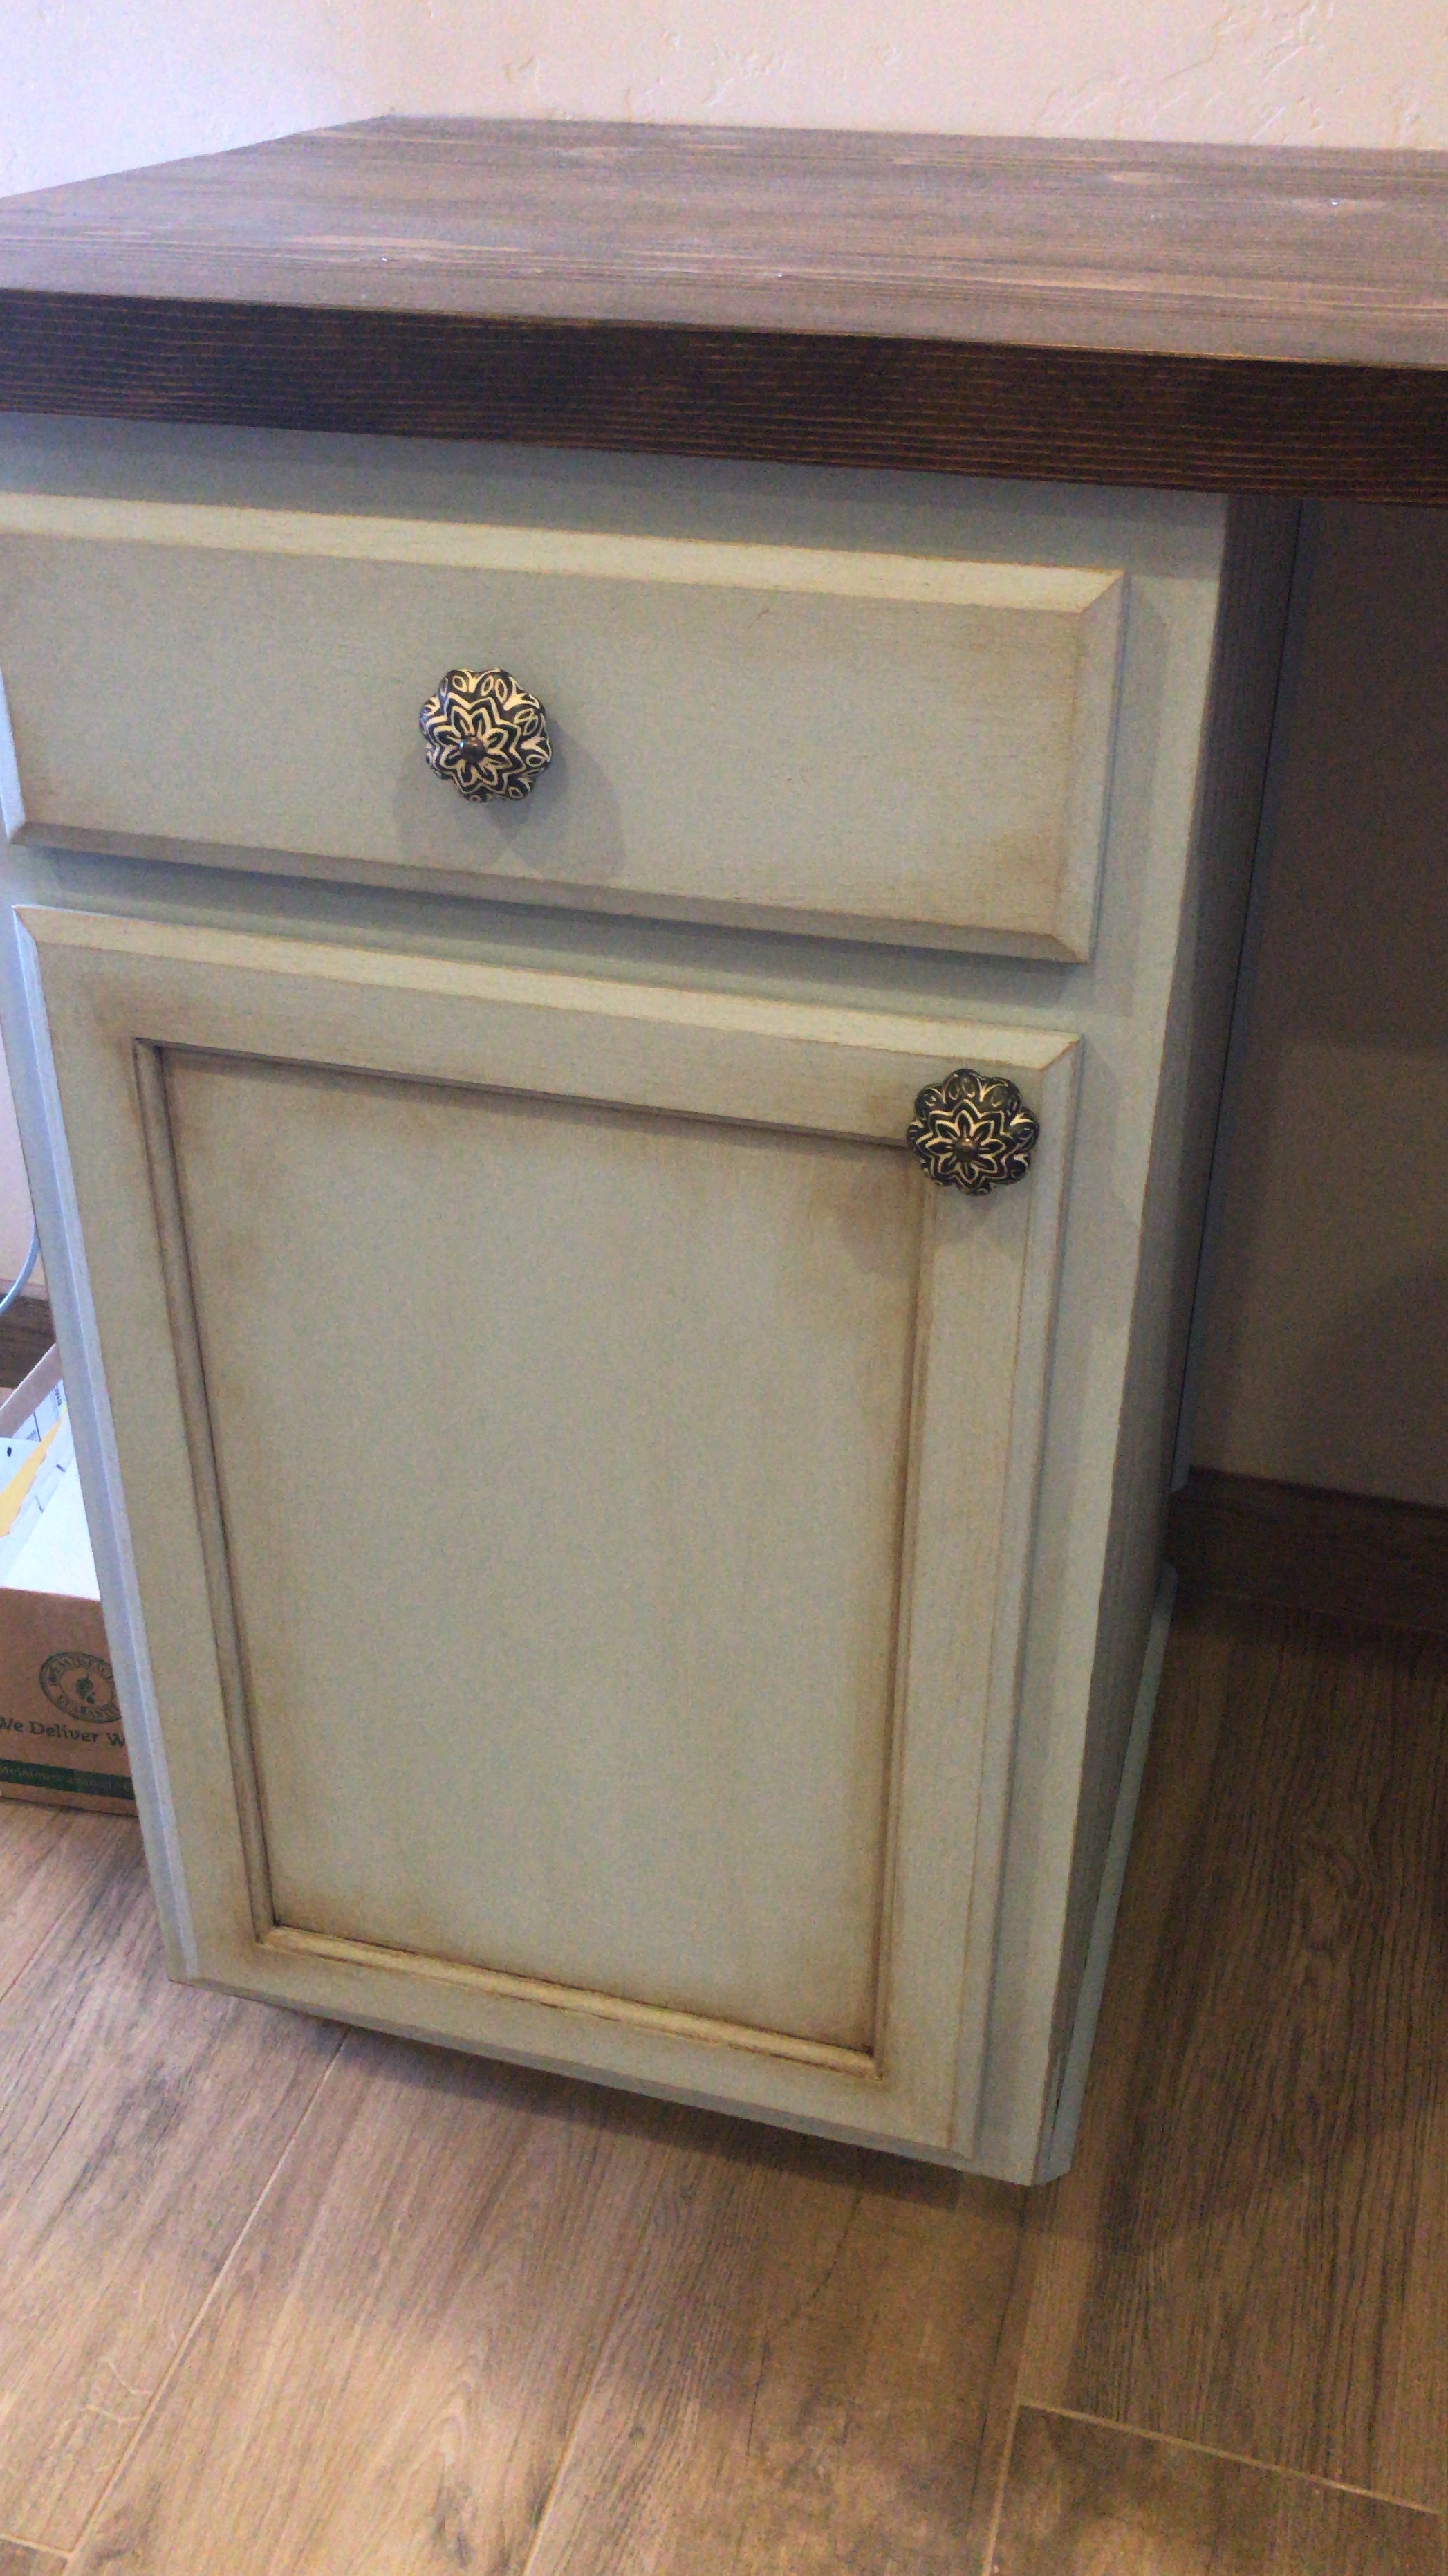 4 Ways to Antique Furniture — A Rustic Rose by Addie